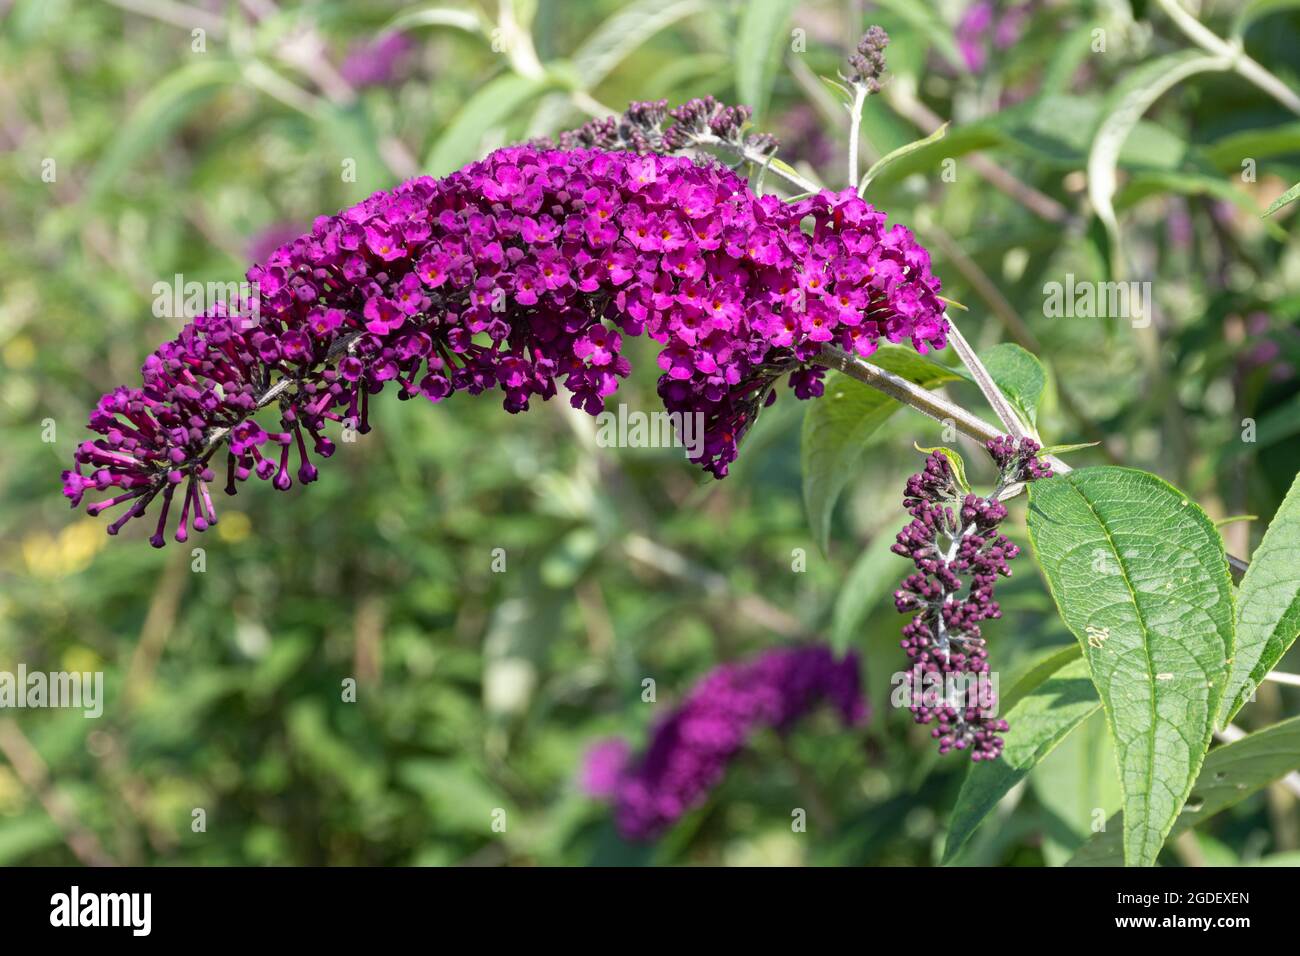 Buddleja davidii Royal Red (buddleia variety), known as a butterfly bush, in flower during august or summer, UK Stock Photo